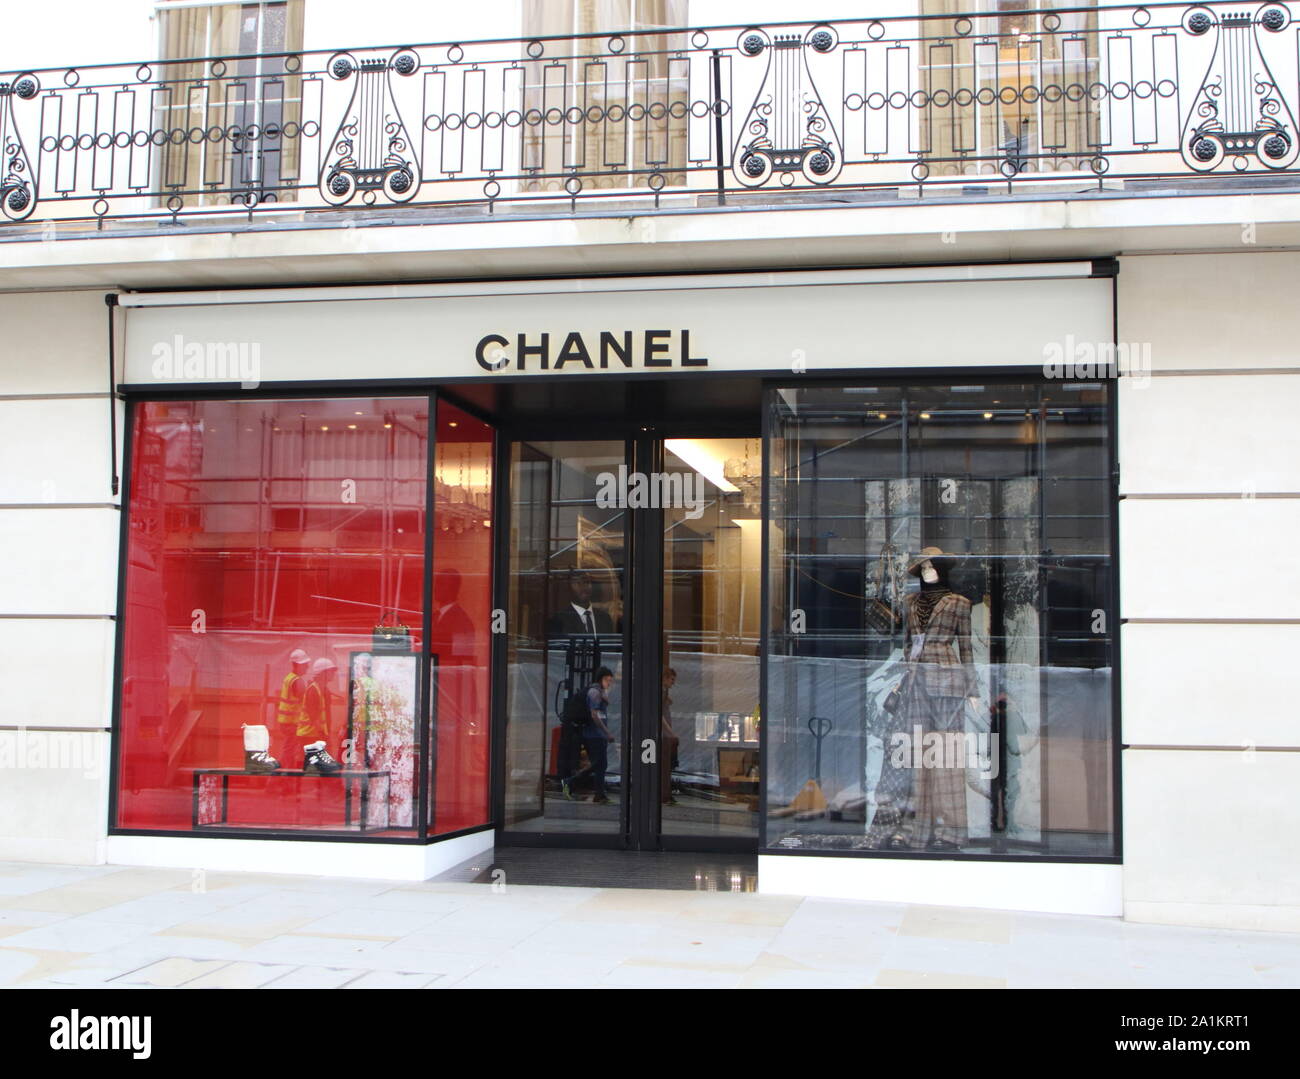 Luxury retailer Chanel opens new flagship store in Londons West End   Gallery  Retail Week